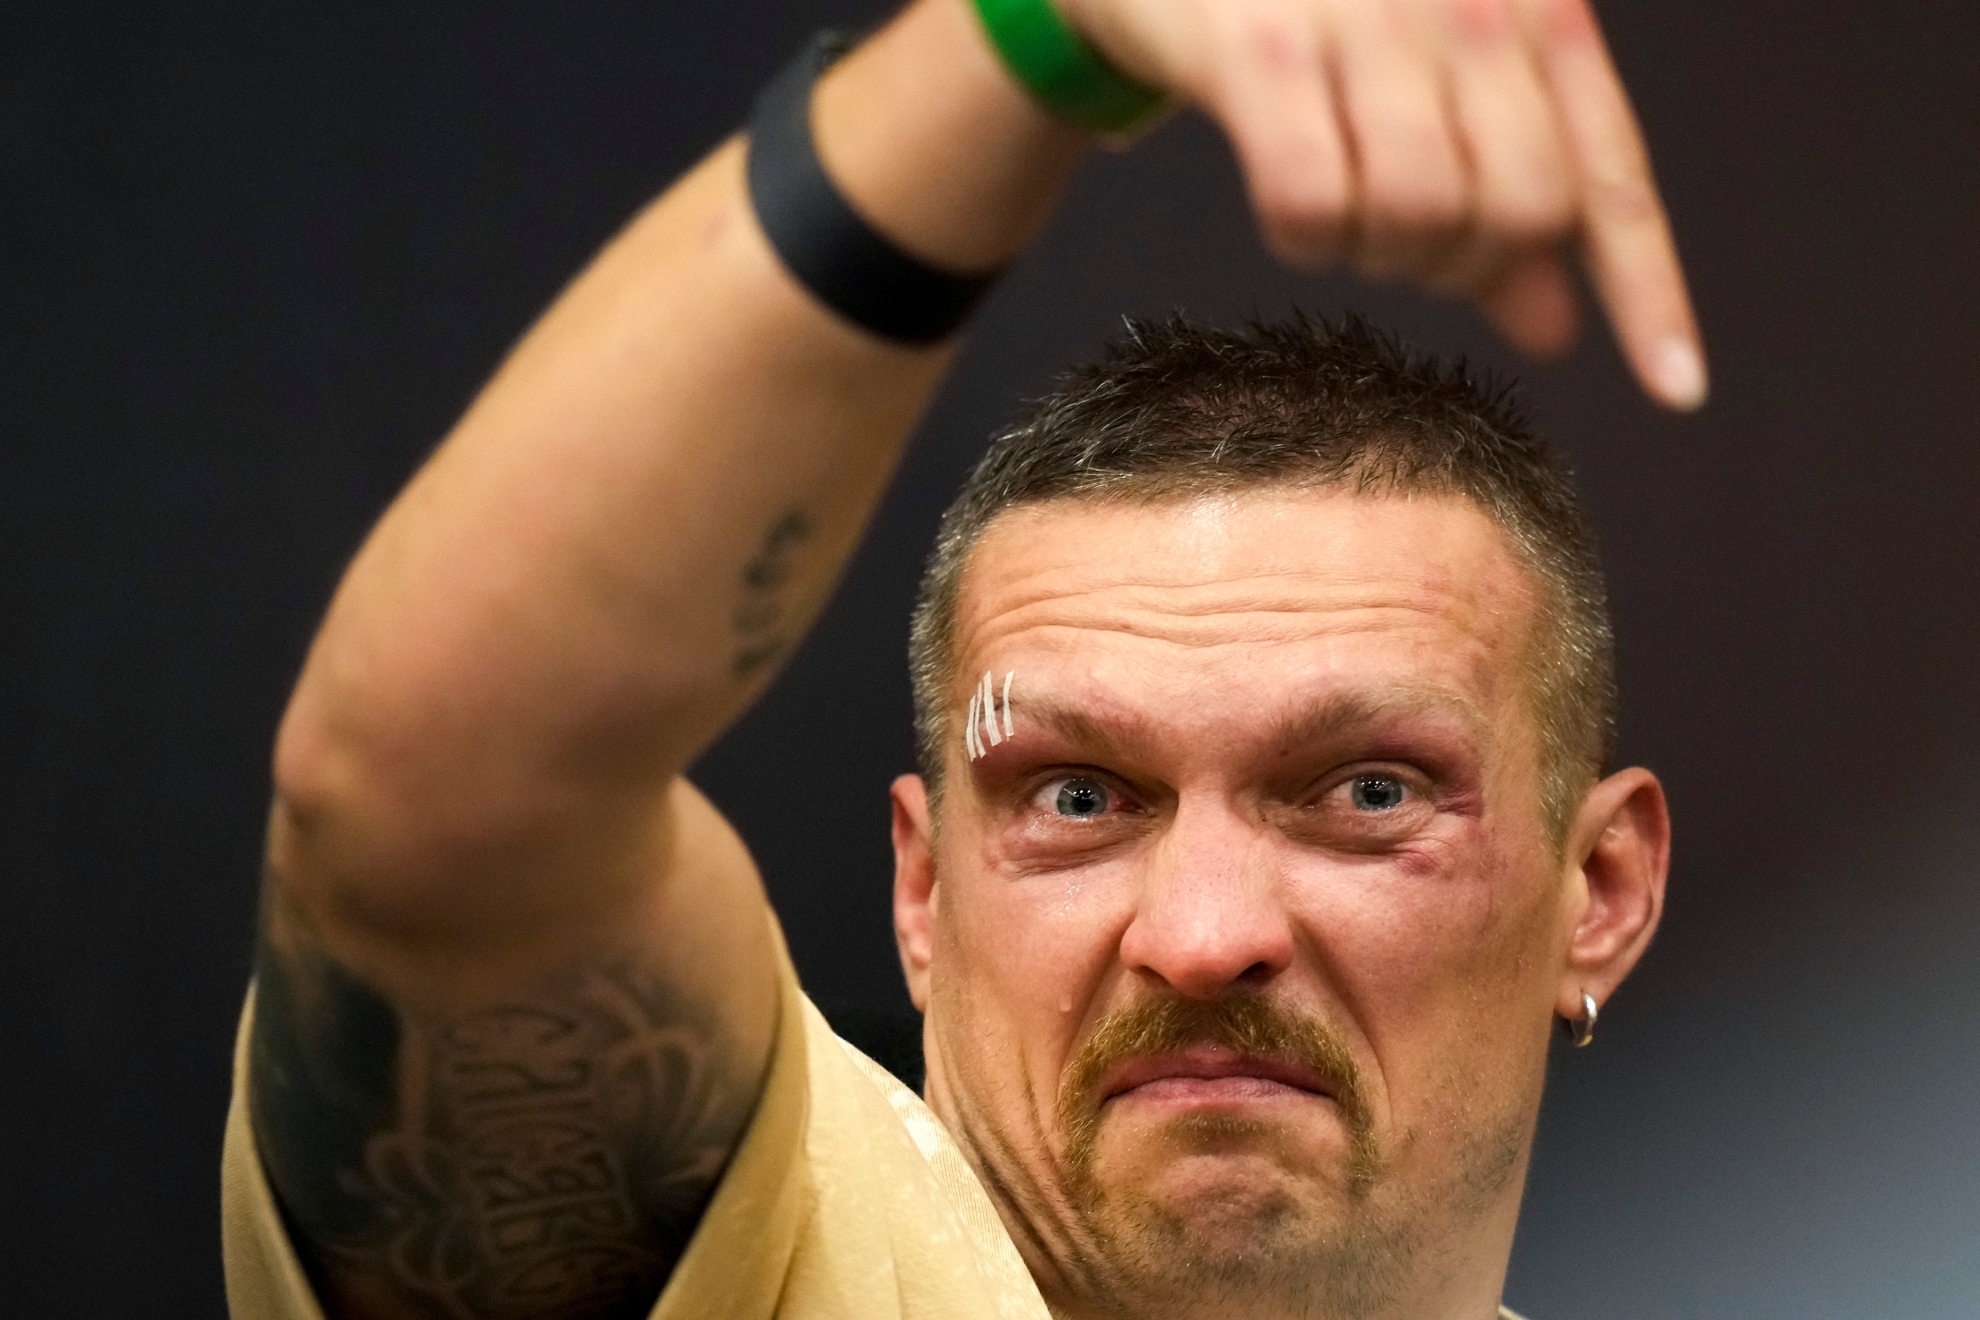 Usyk compares Fury to shaken sparkling water, calls Joshua classy